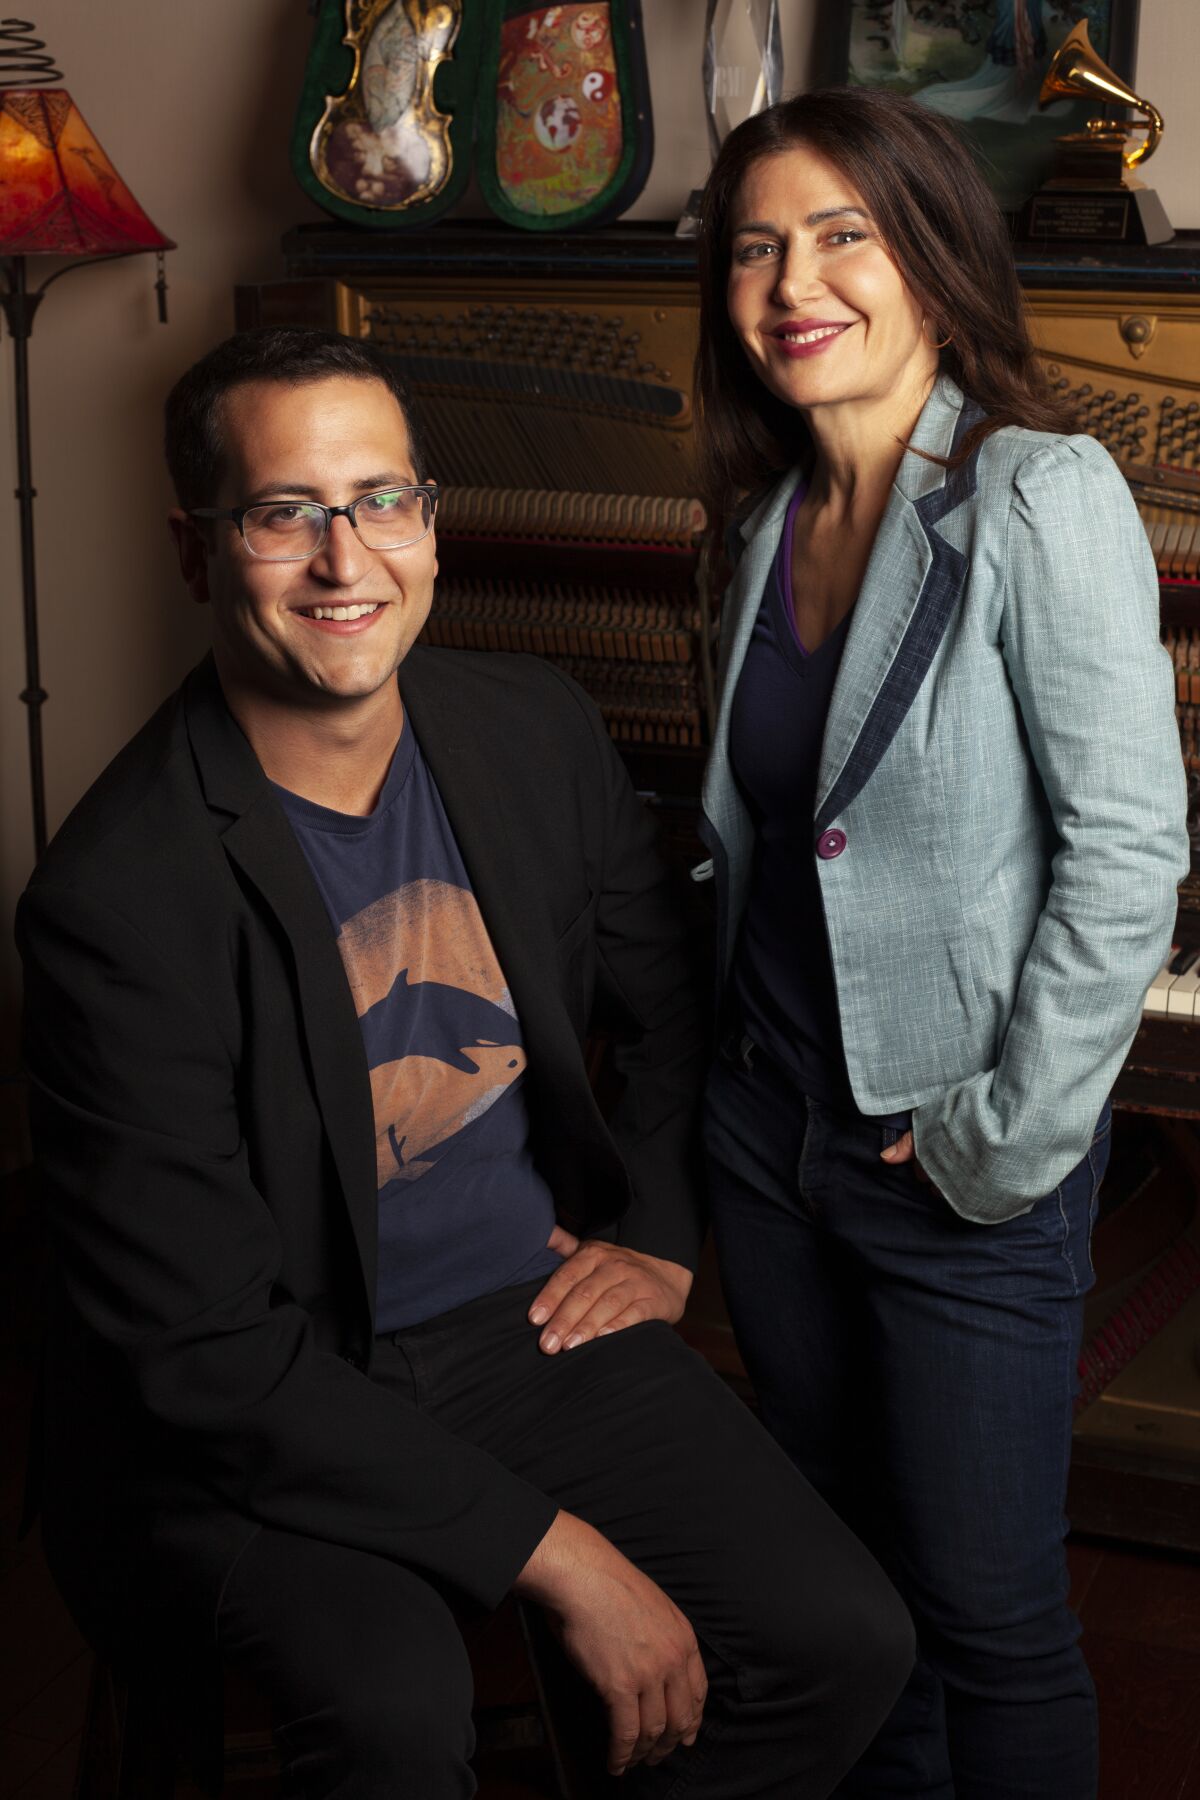 A smiling, bespectacled man in a black blazer & T-shirt sits & a dark-haired, blue-jacketed, smiling woman stands by a piano.